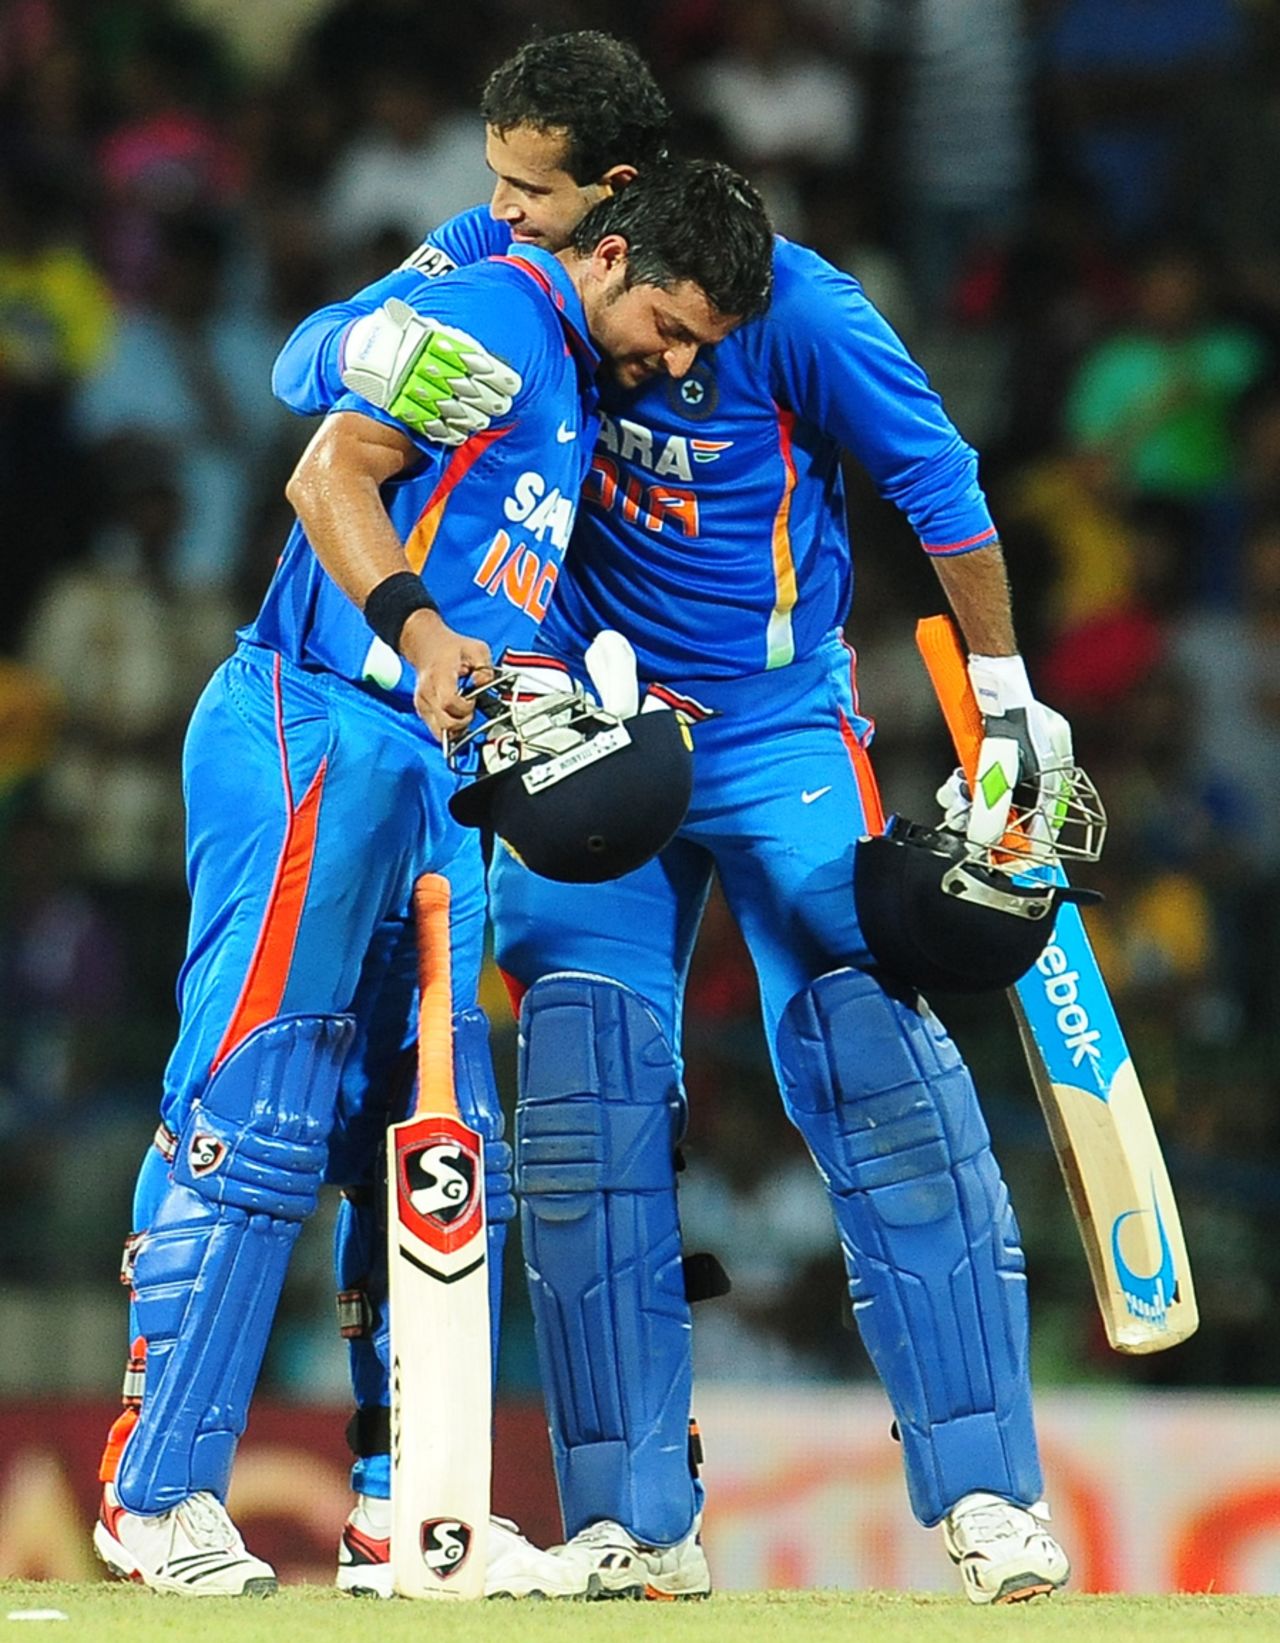 Suresh Raina is congratulated by Irfan Pathan after India's victory off the last over, Sri Lanka v India, 3rd ODI, Colombo, July 28, 2012